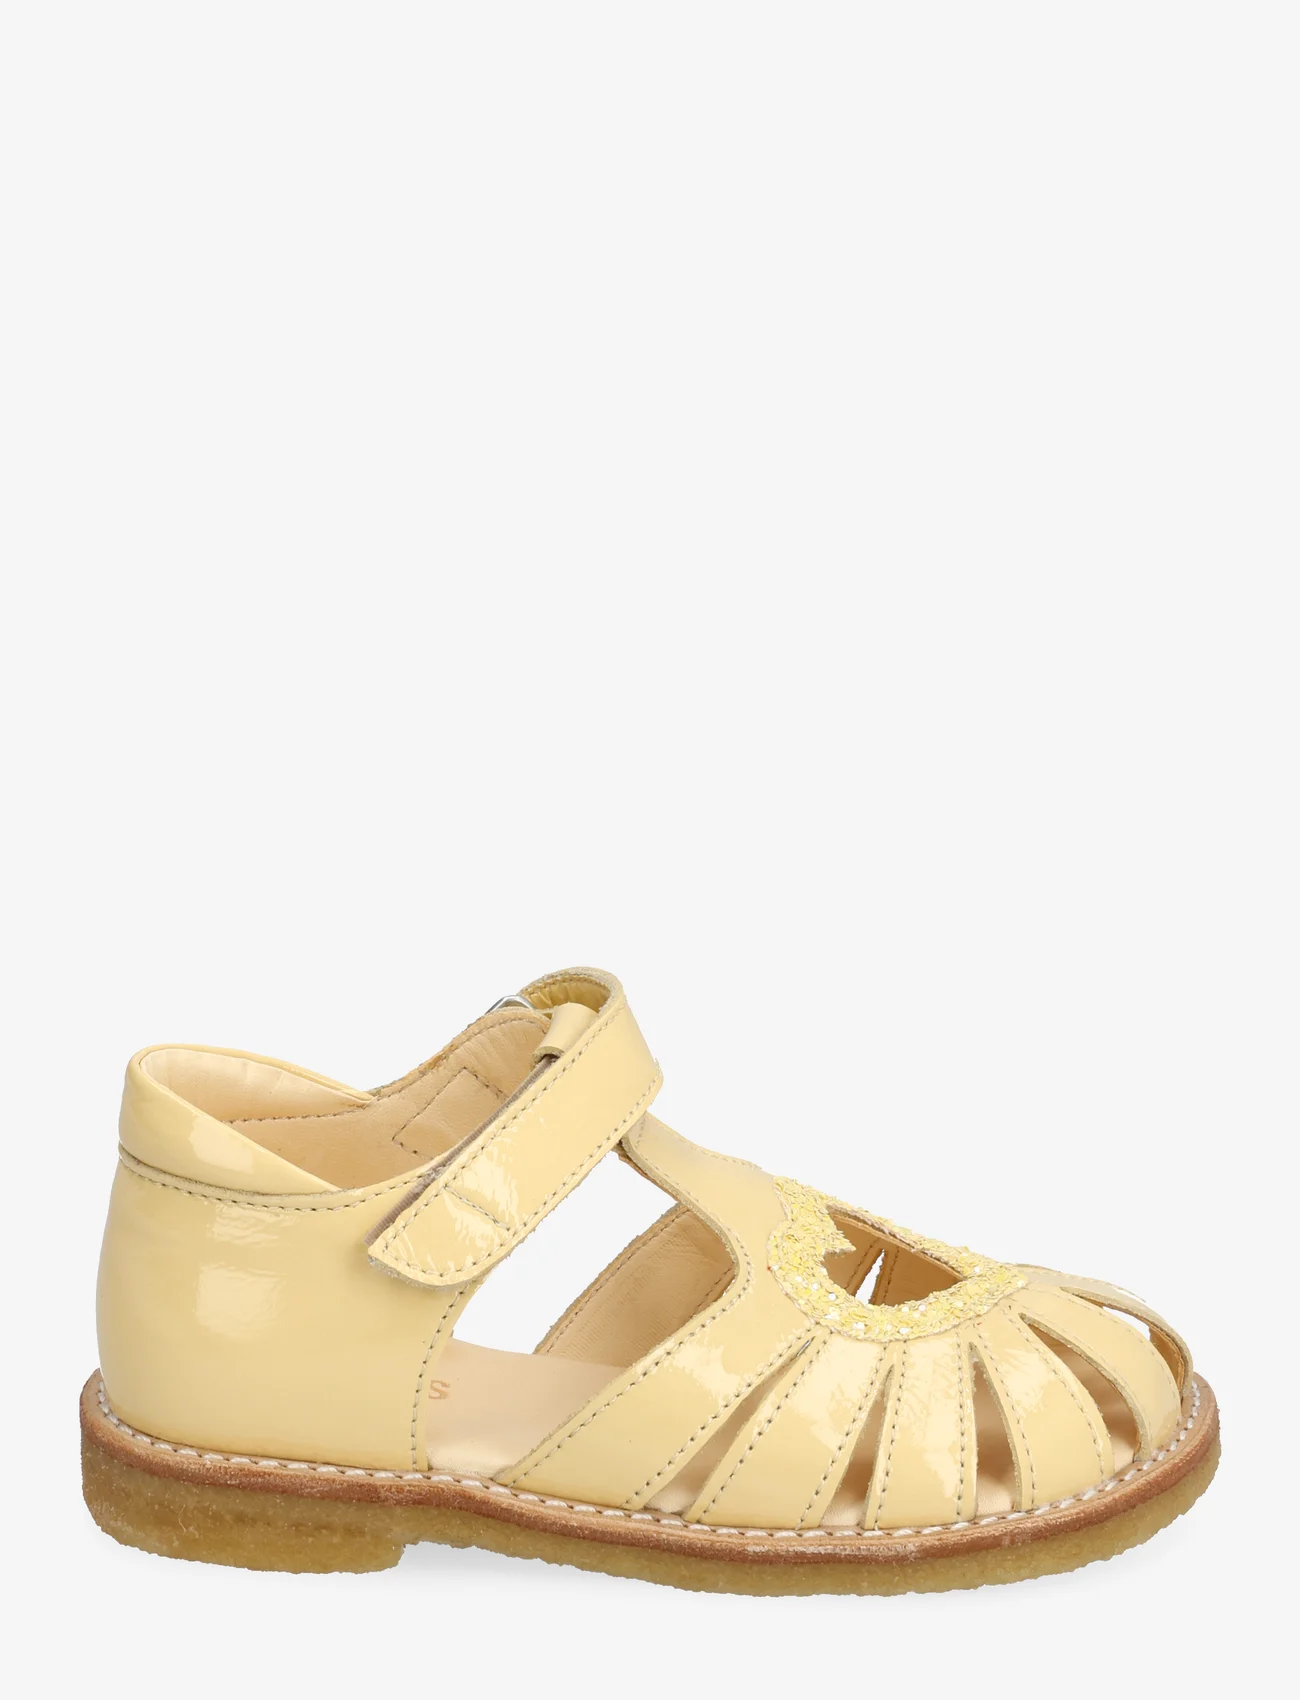 ANGULUS - Sandals - flat - closed toe - - gode sommertilbud - 2706/2825 mellow yellow/pineap - 1